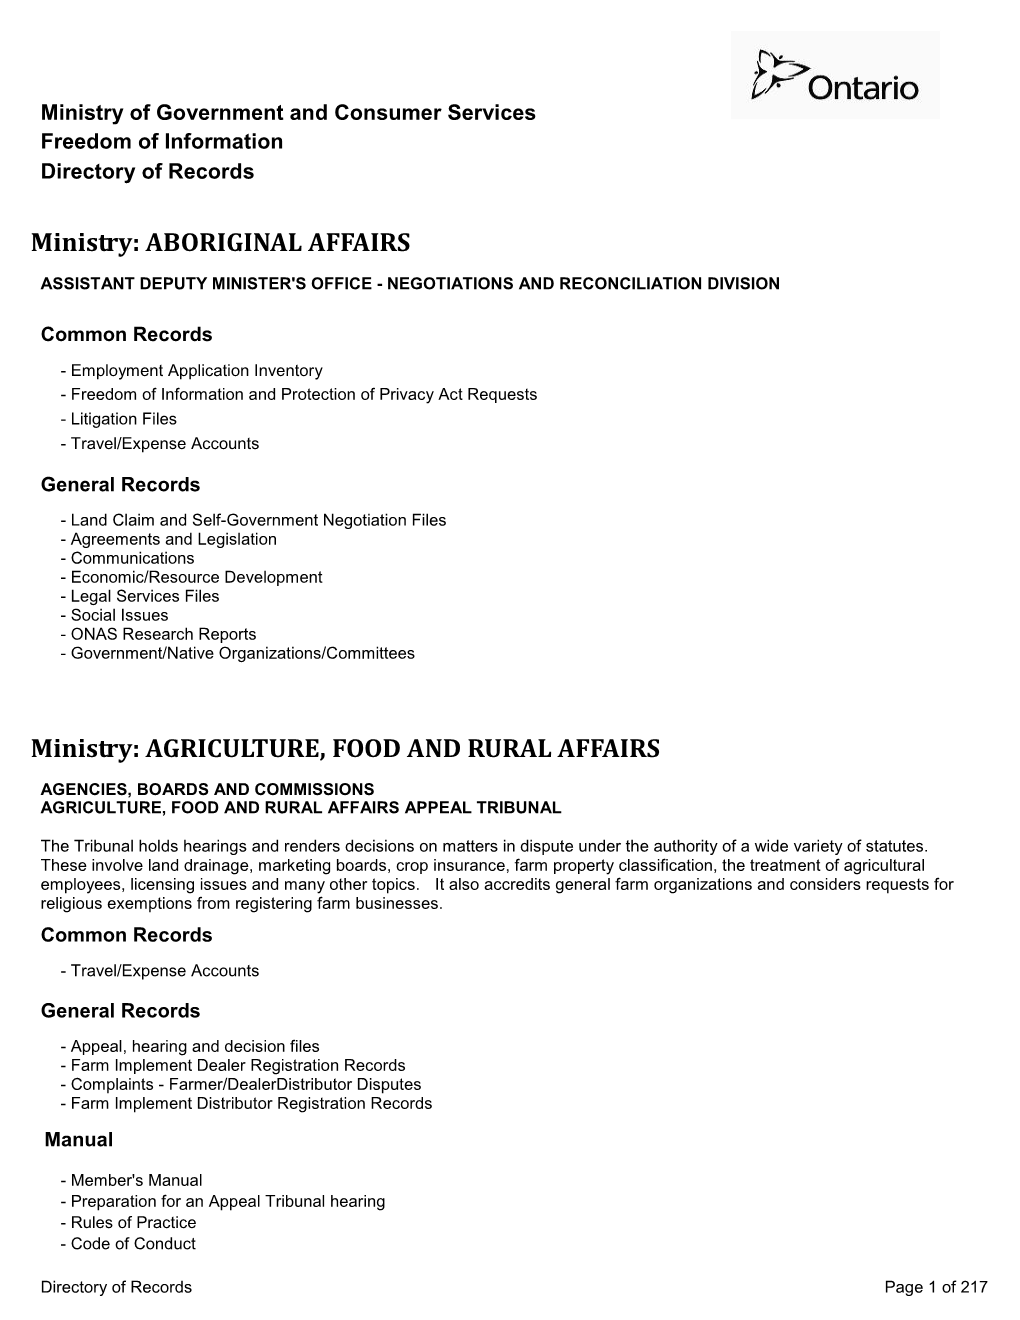 Ministry: ABORIGINAL AFFAIRS Ministry: AGRICULTURE, FOOD